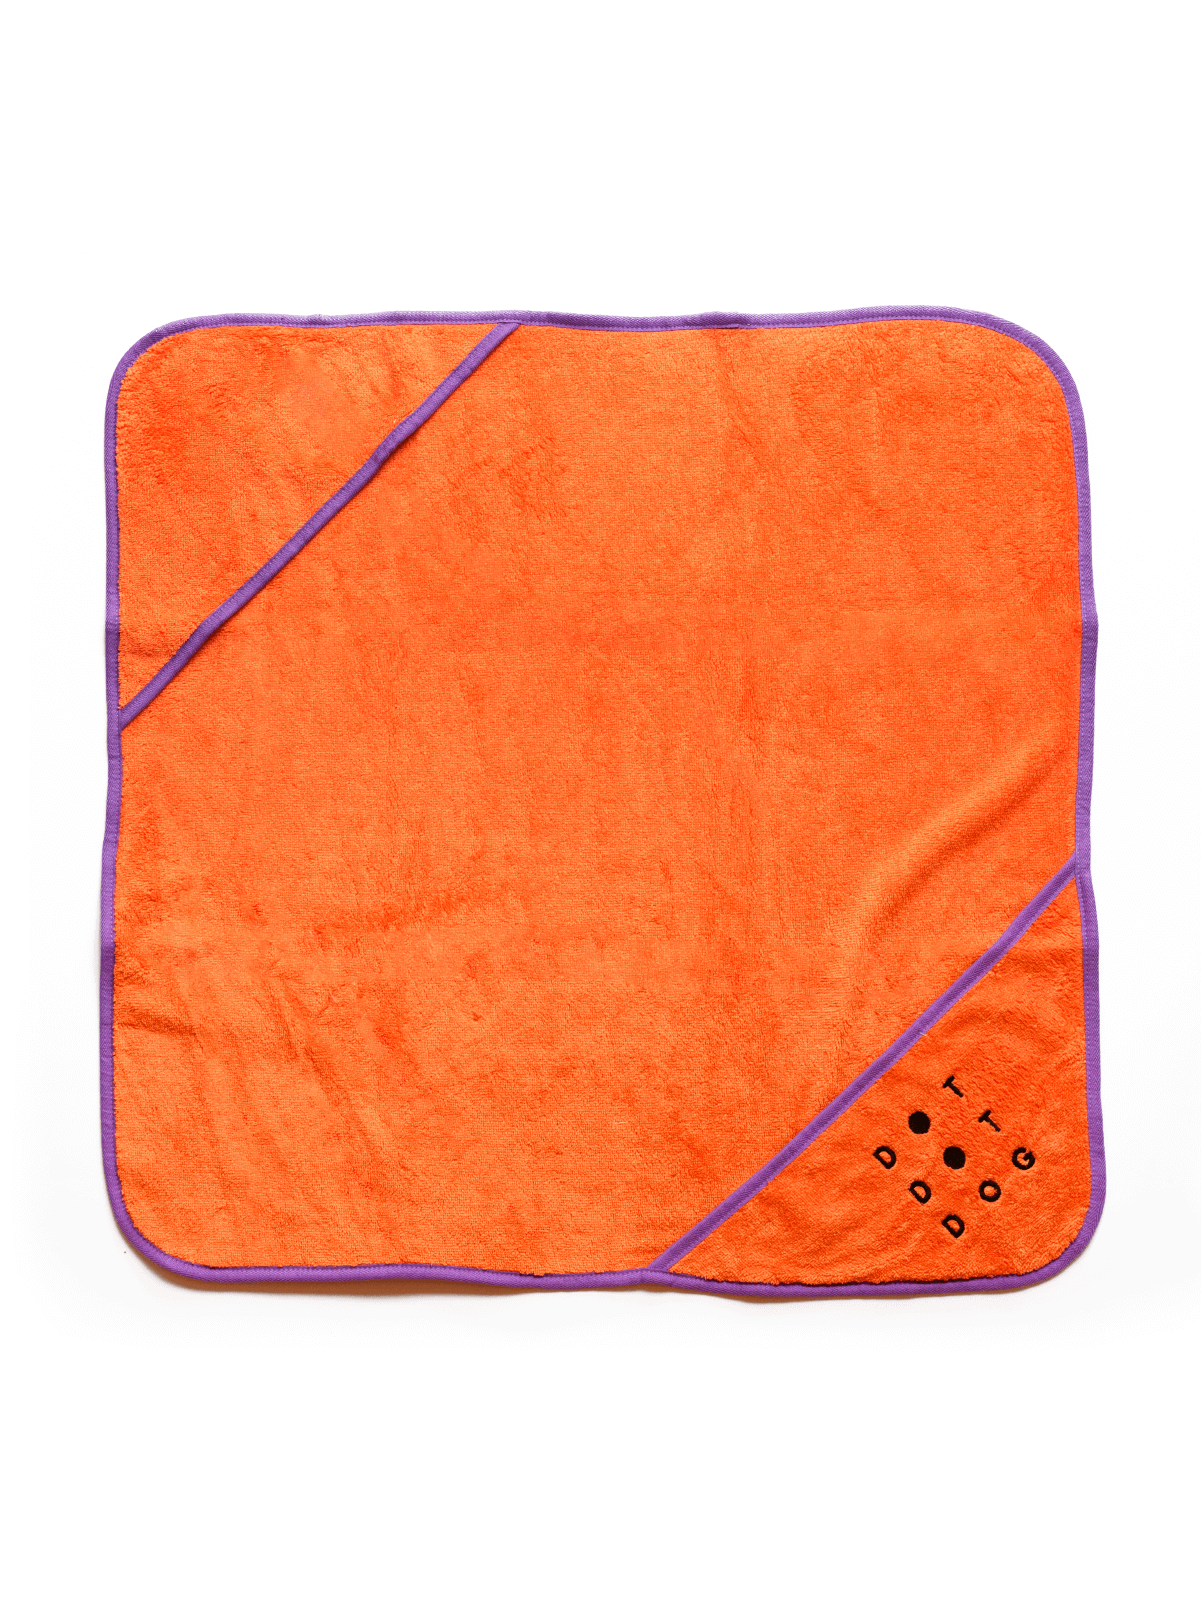 Full image of towel opened up showing drying pockets